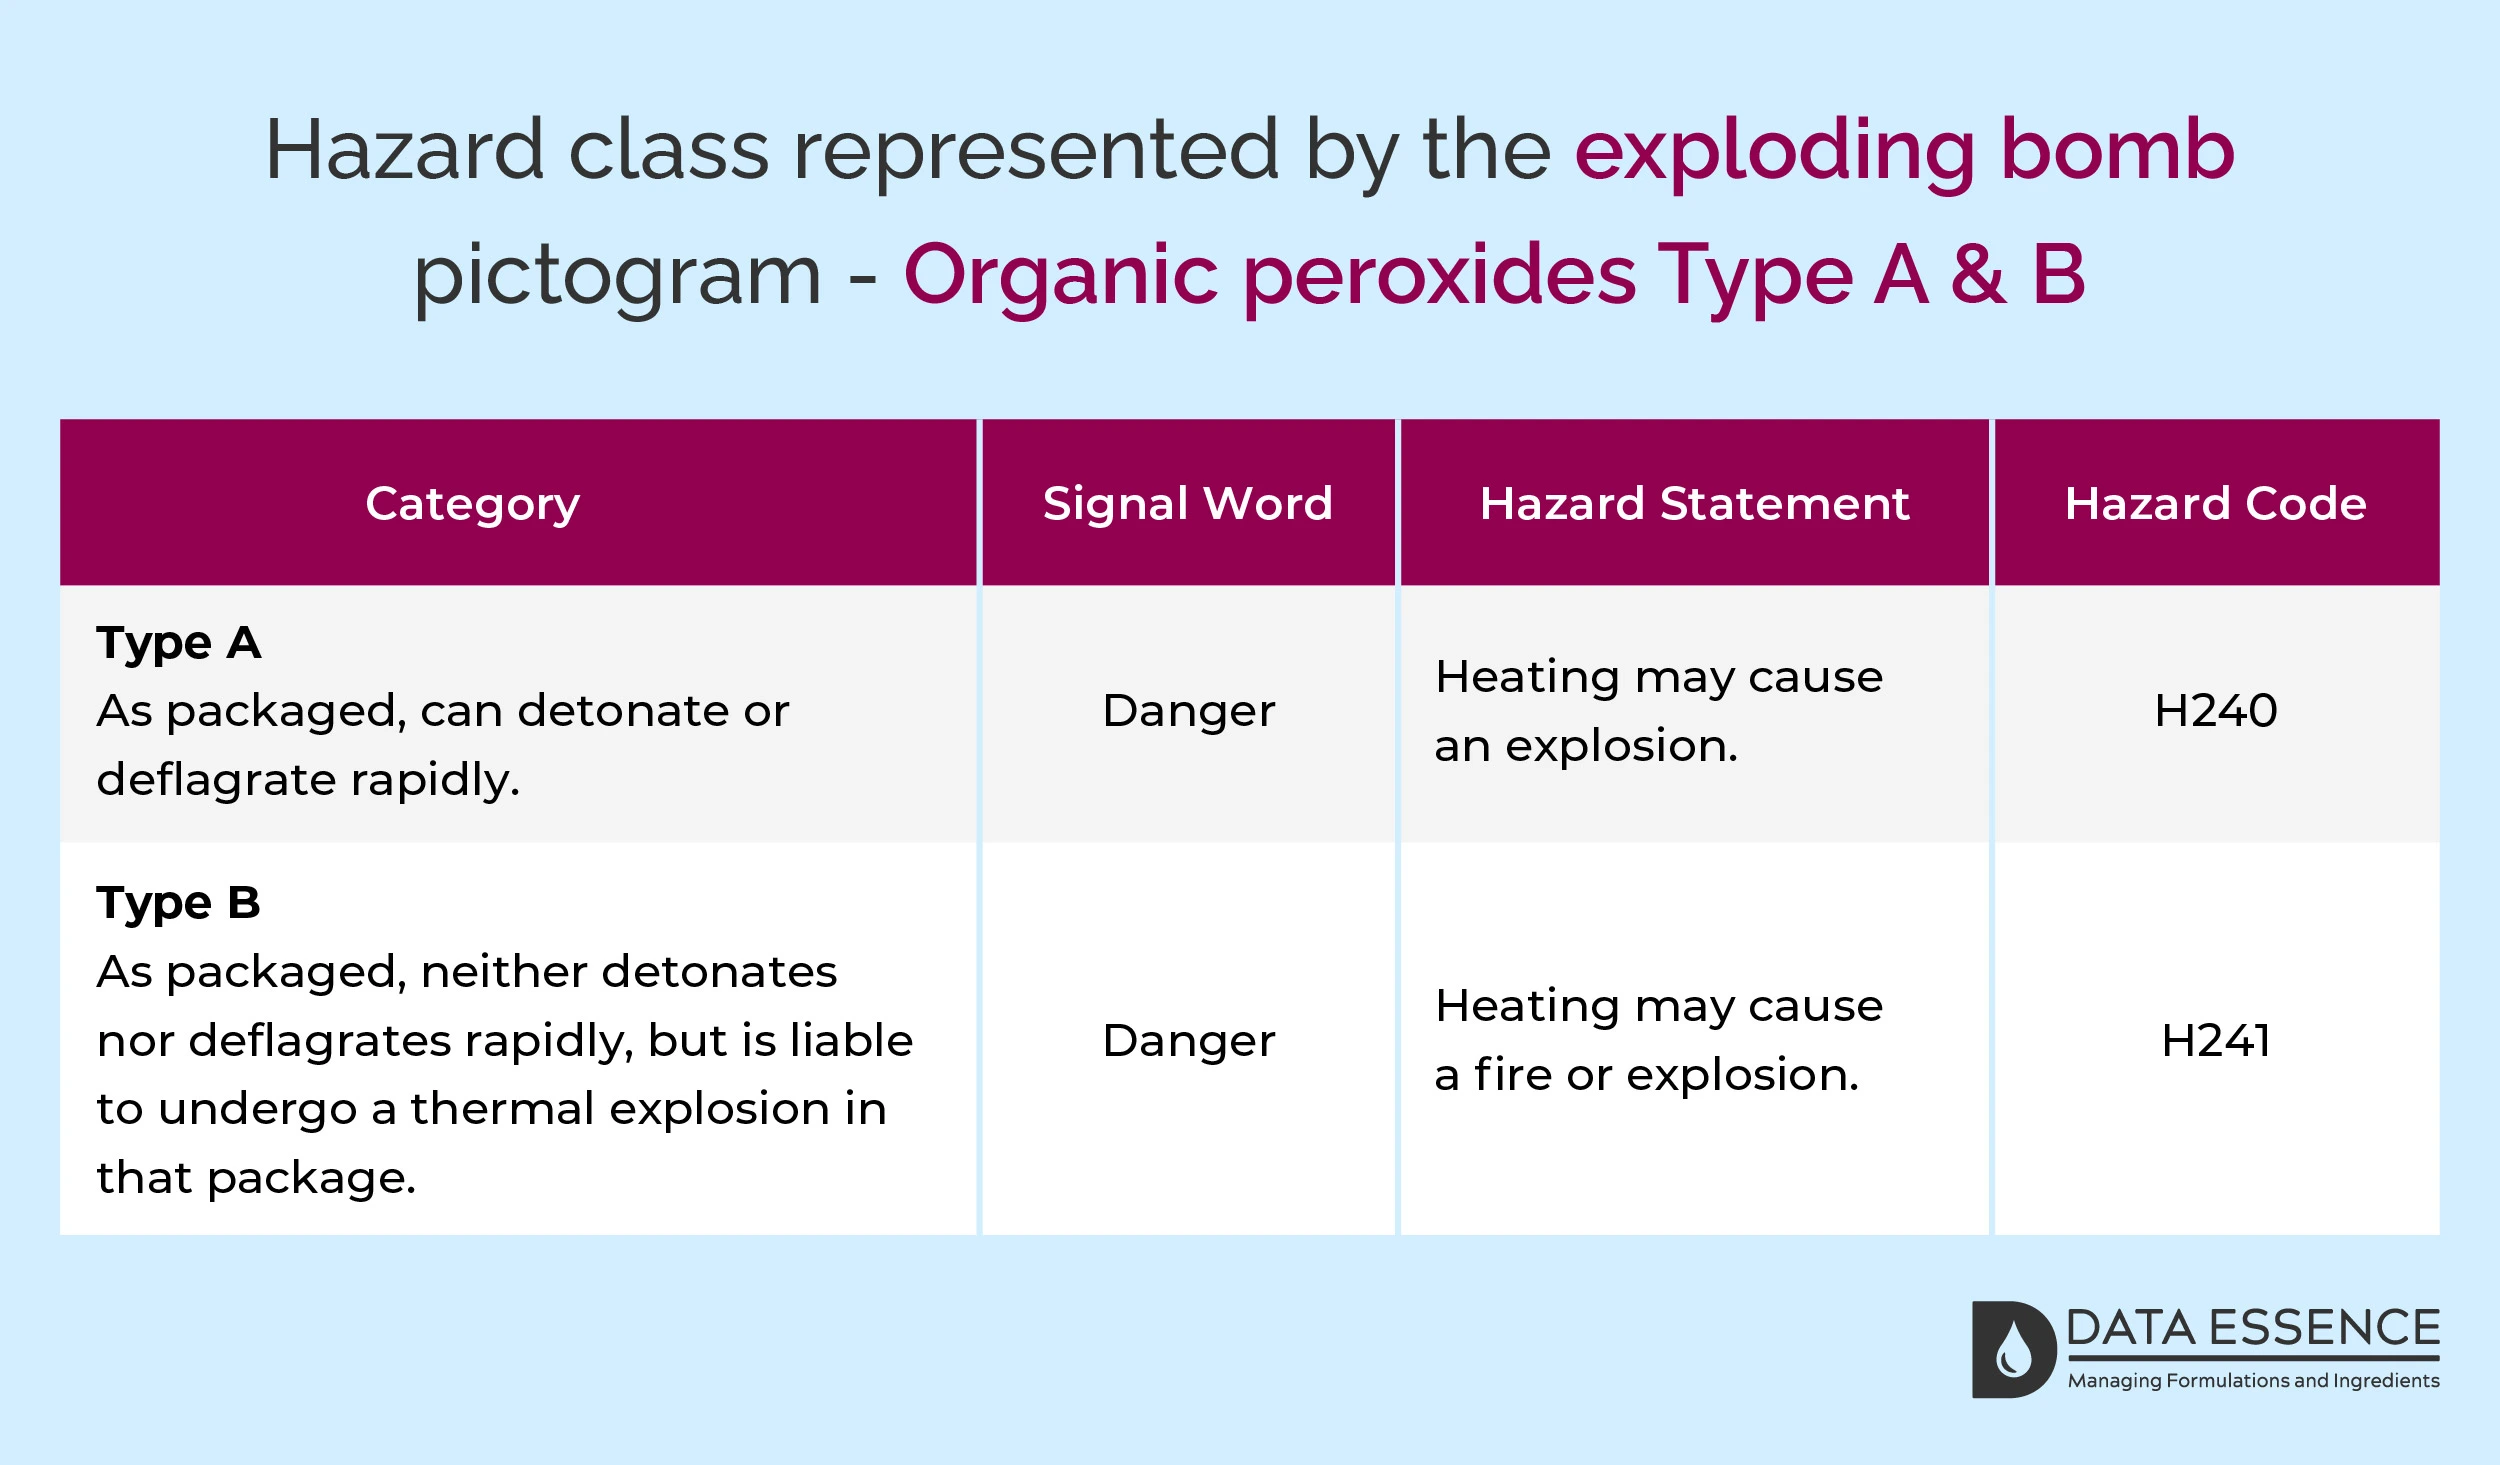 Hazard class represented by the exploding bomb pictogram - Organic peroxides Type A & B